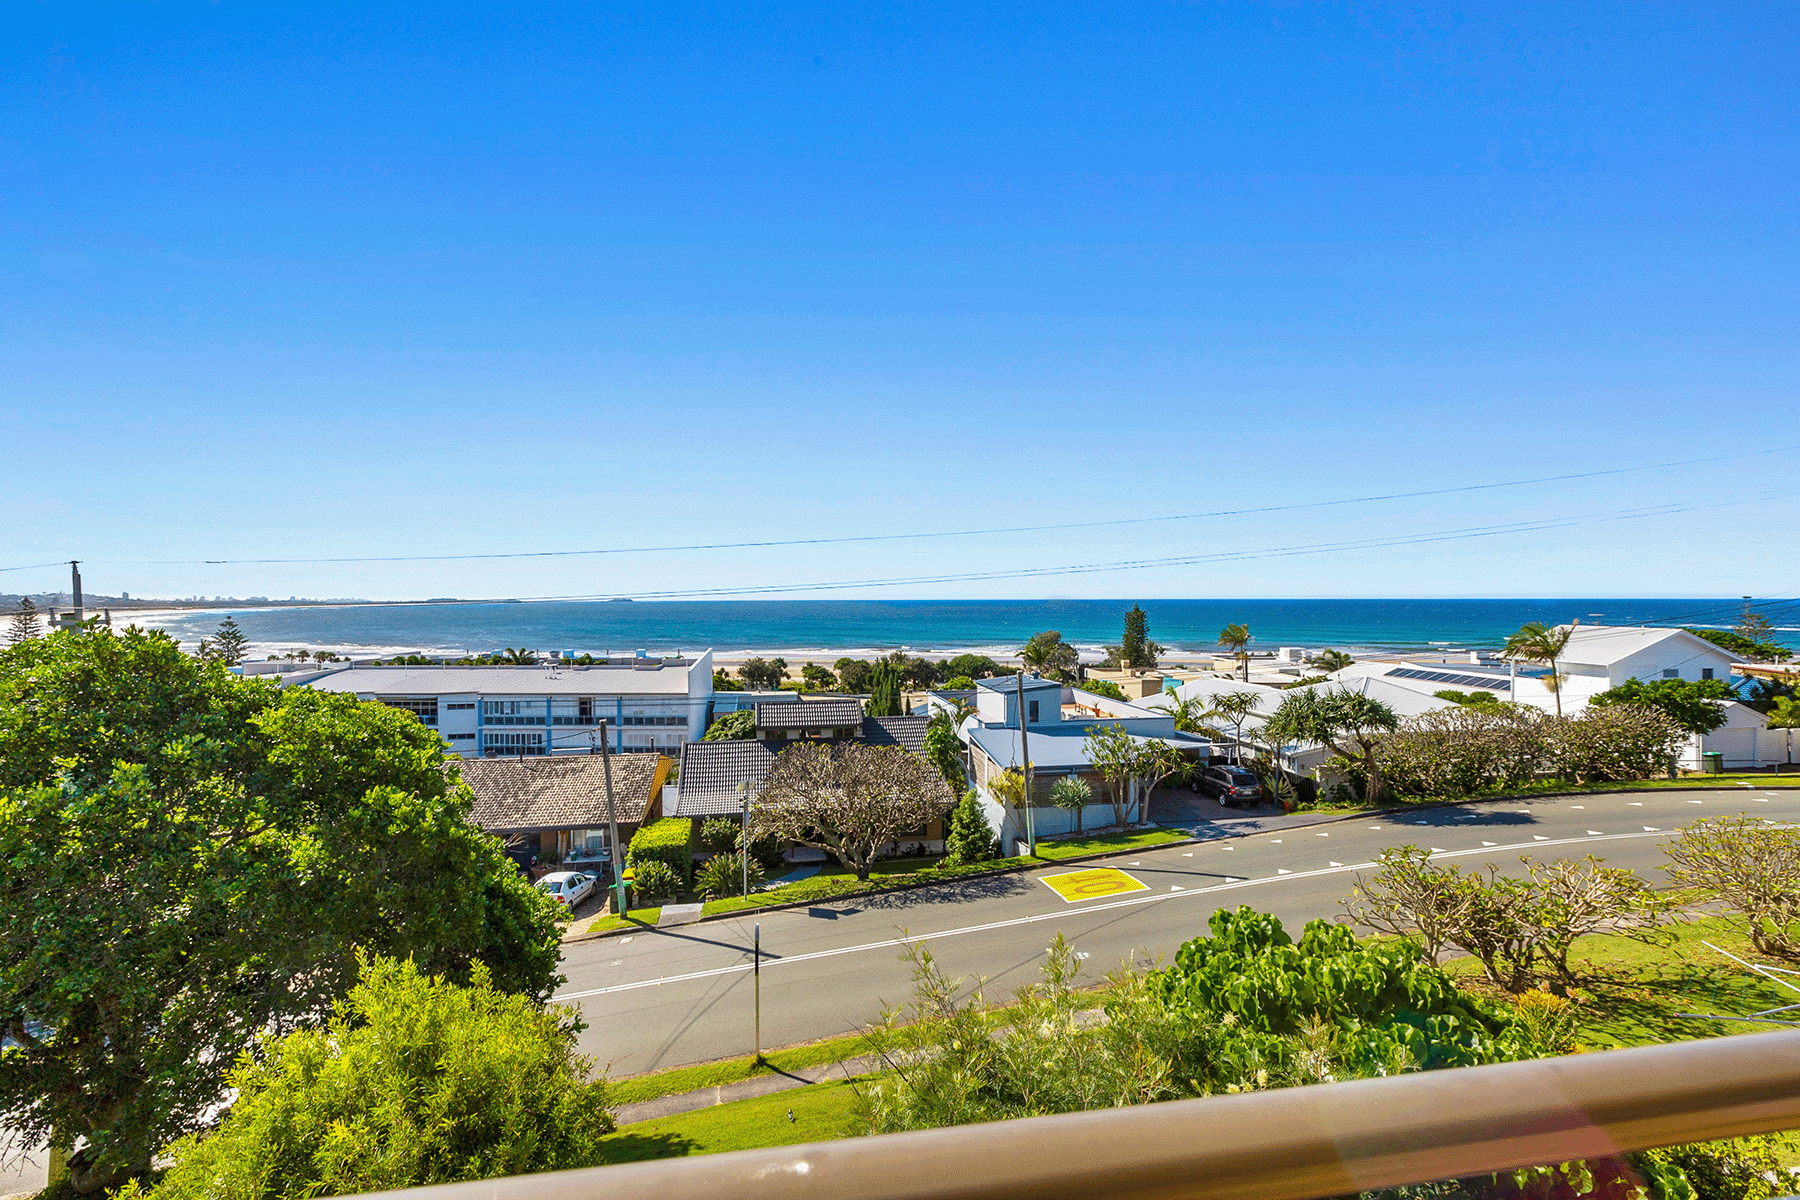 View of the ocean from the first floor apartment balcony